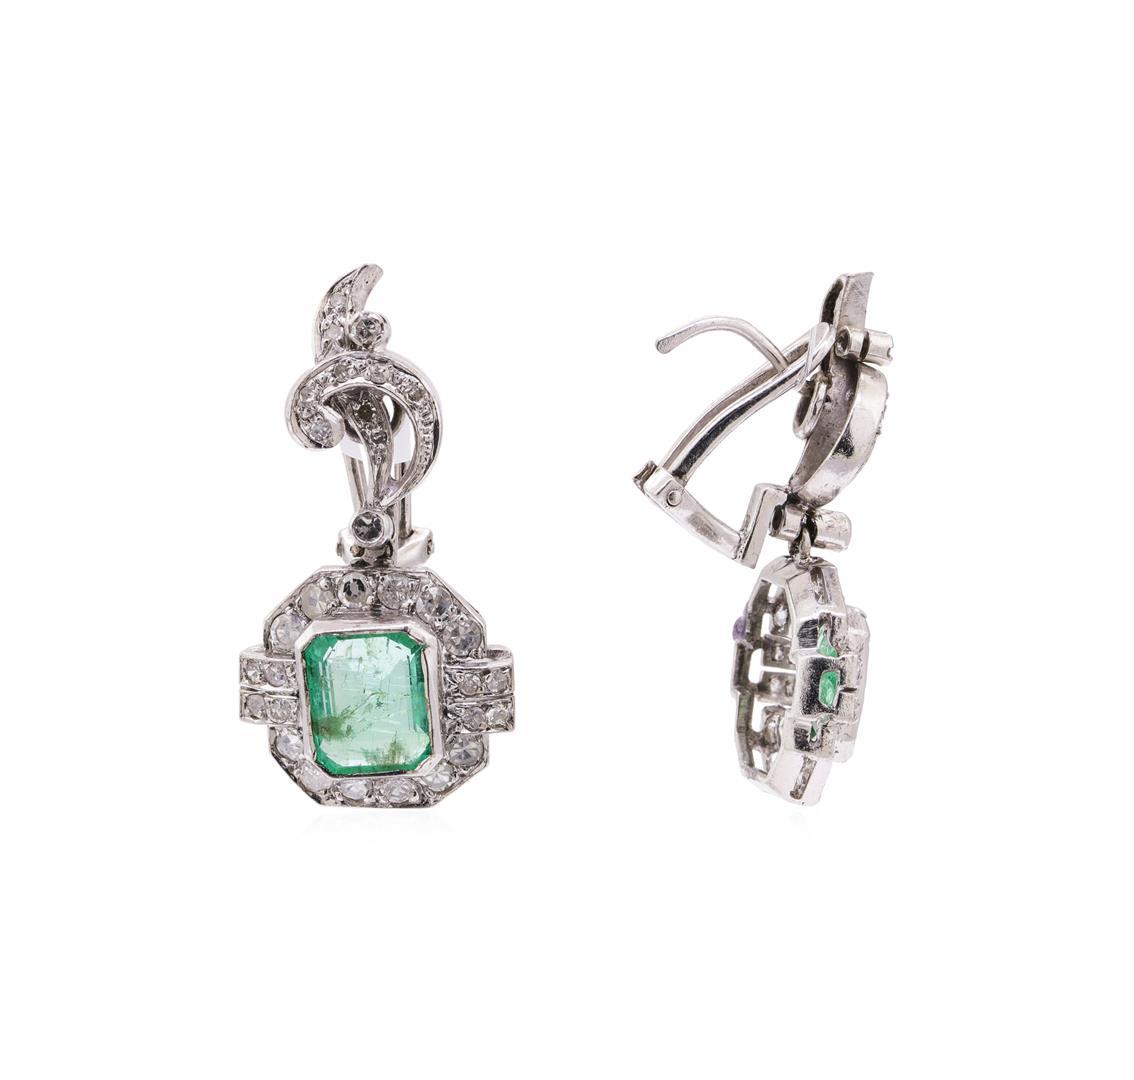 7.80 ctw Emerald And Diamond Ring And Earrings - 14KT White Gold